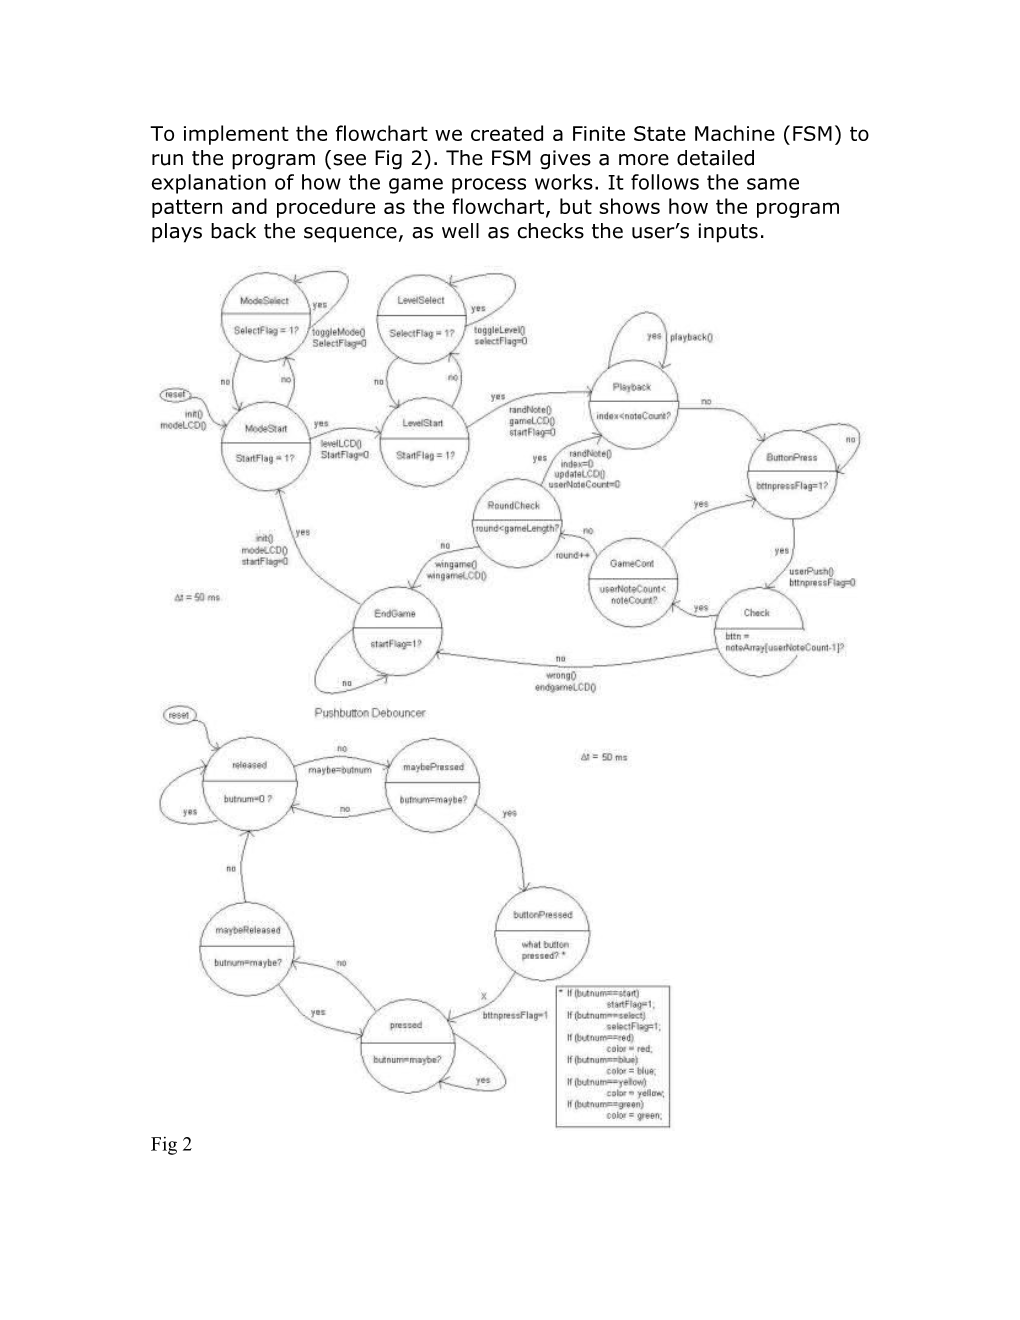 The Game Was Designed by Following the Procedure Outlined in the Flowchart in Fig 1. The